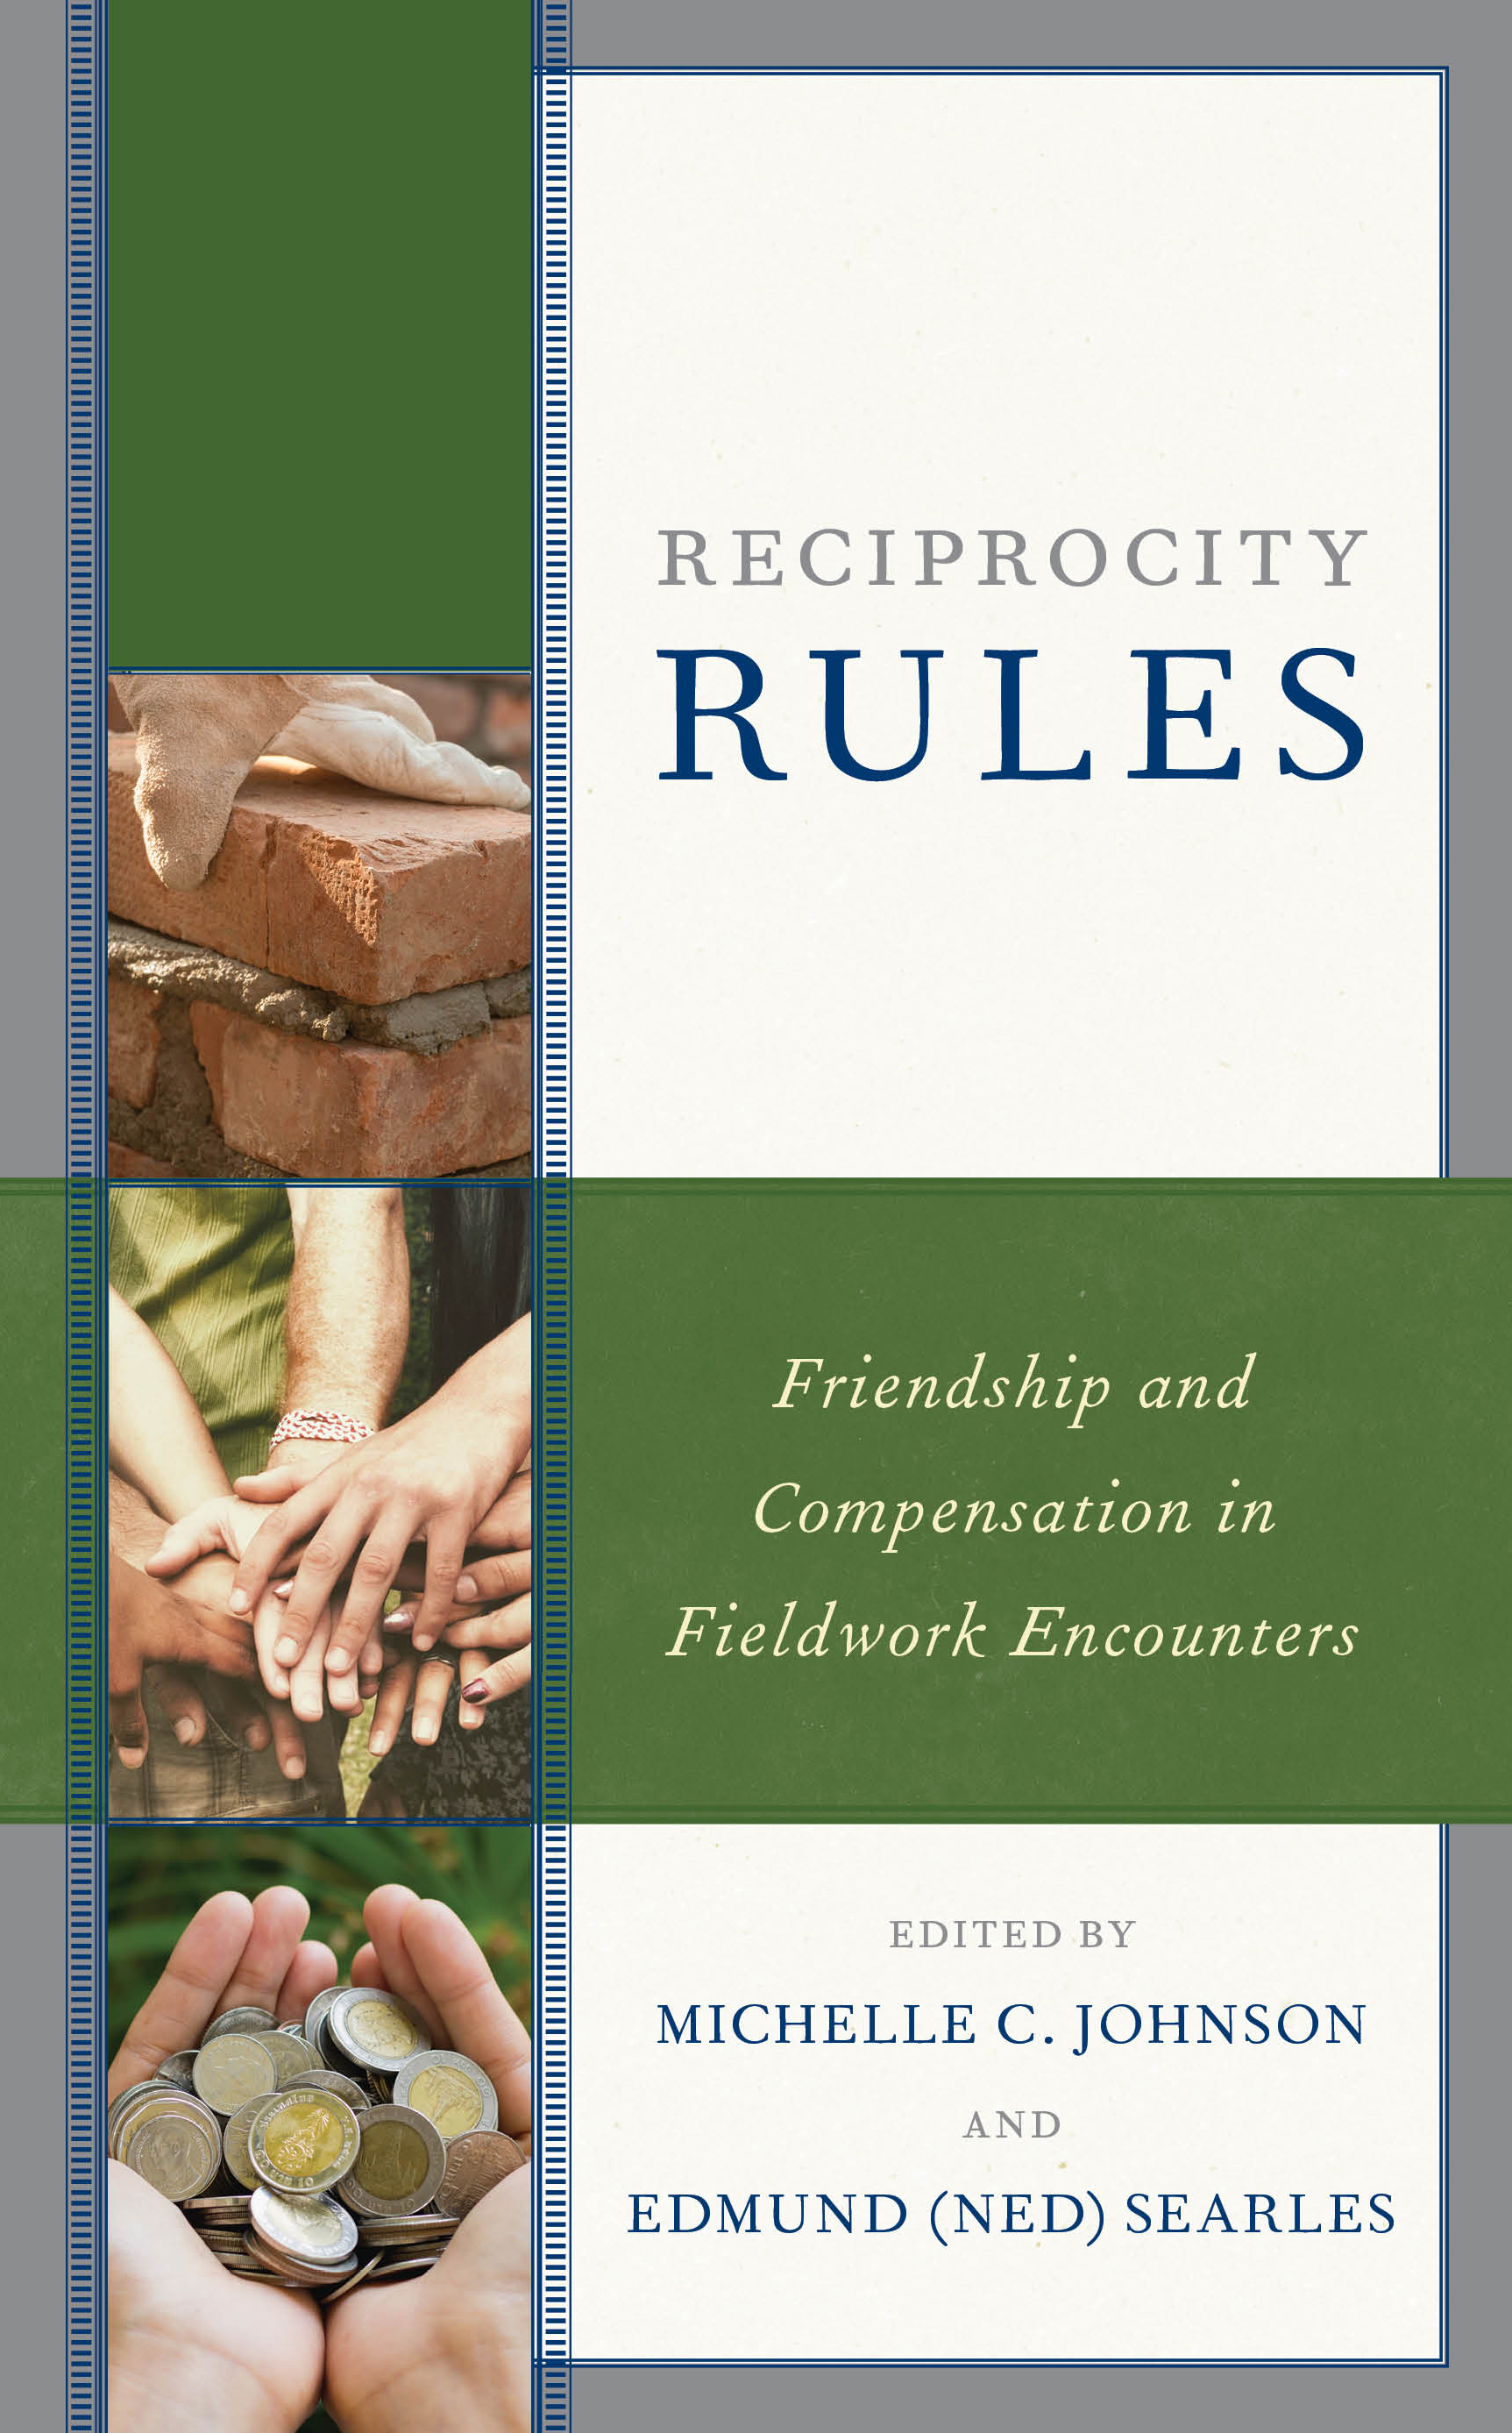 Reciprocity Rules: Friendship and Compensation in Fieldwork Encounters